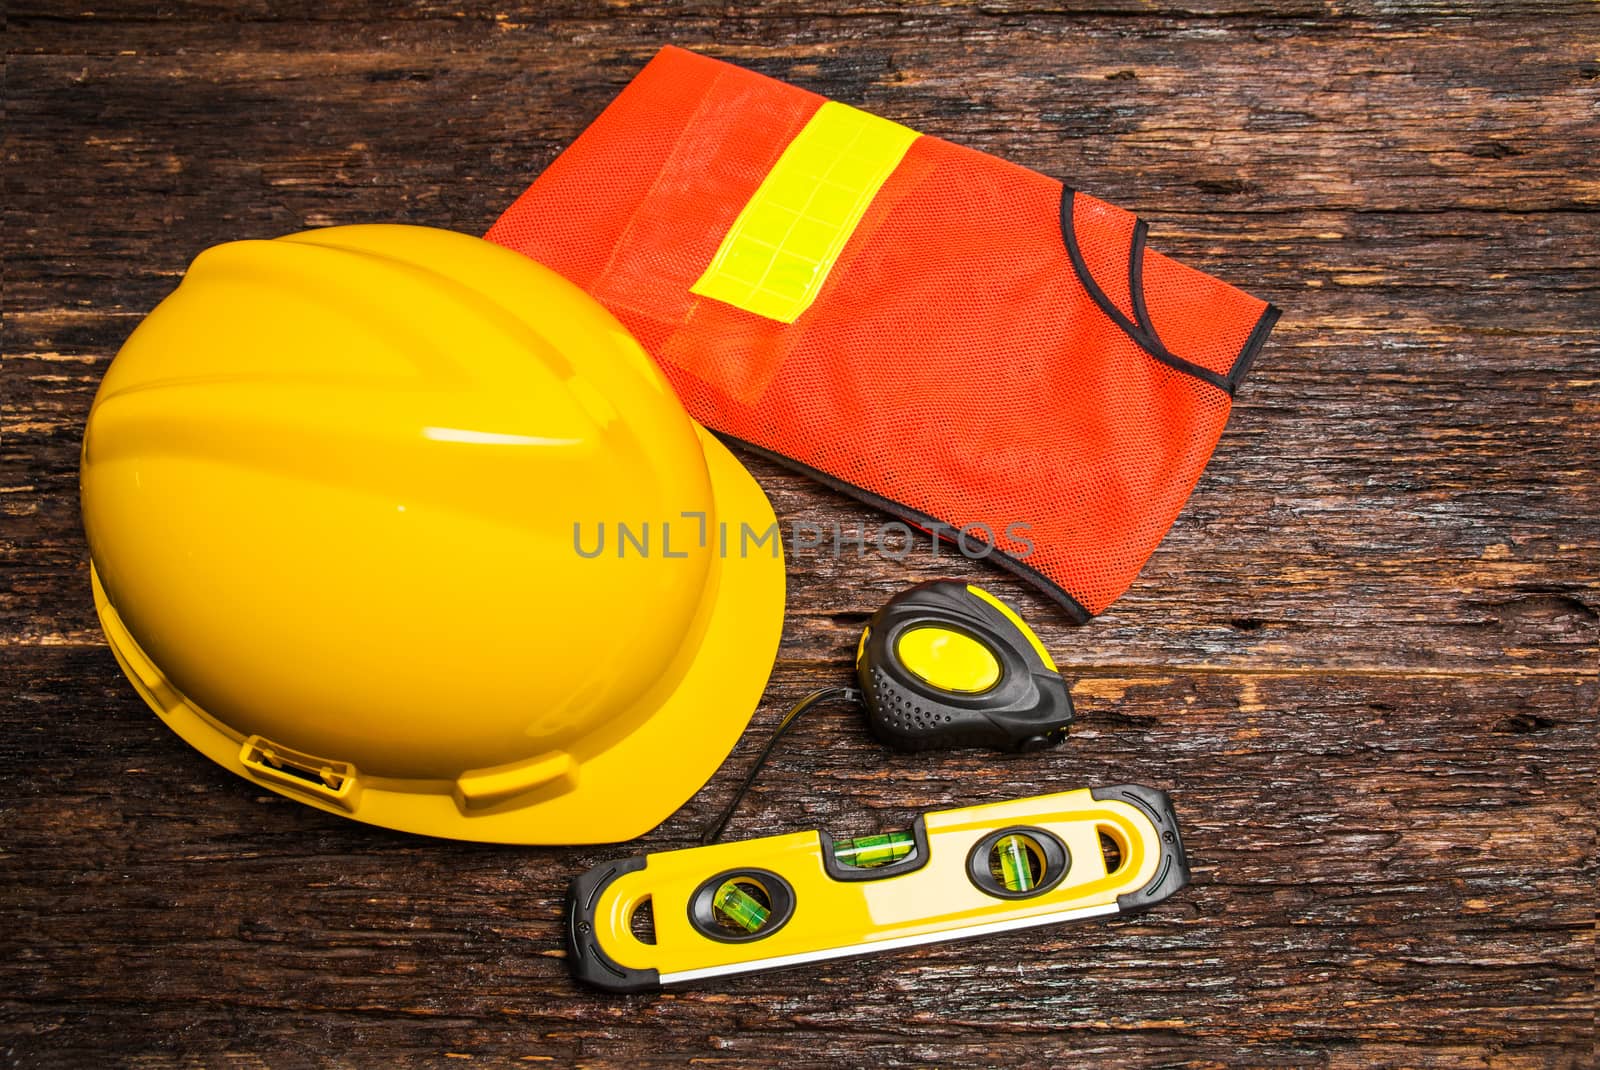 Construction tools or safety equipment with yellow helmet on wooden table.